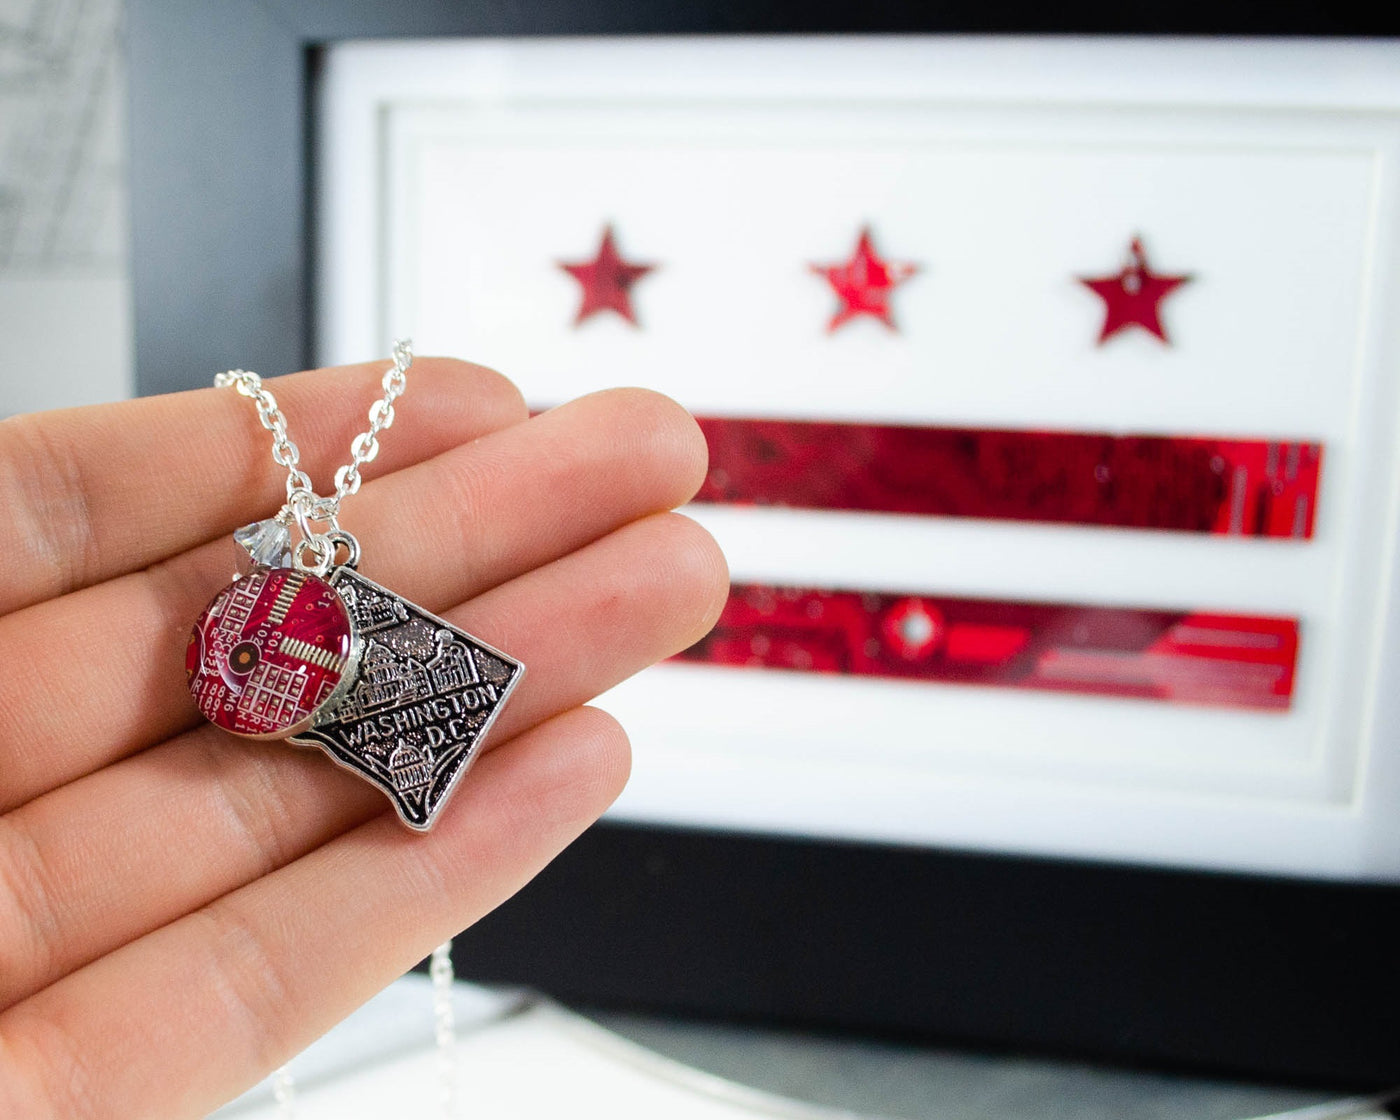 washington dc necklace with red circuit board charm with dc flag in background